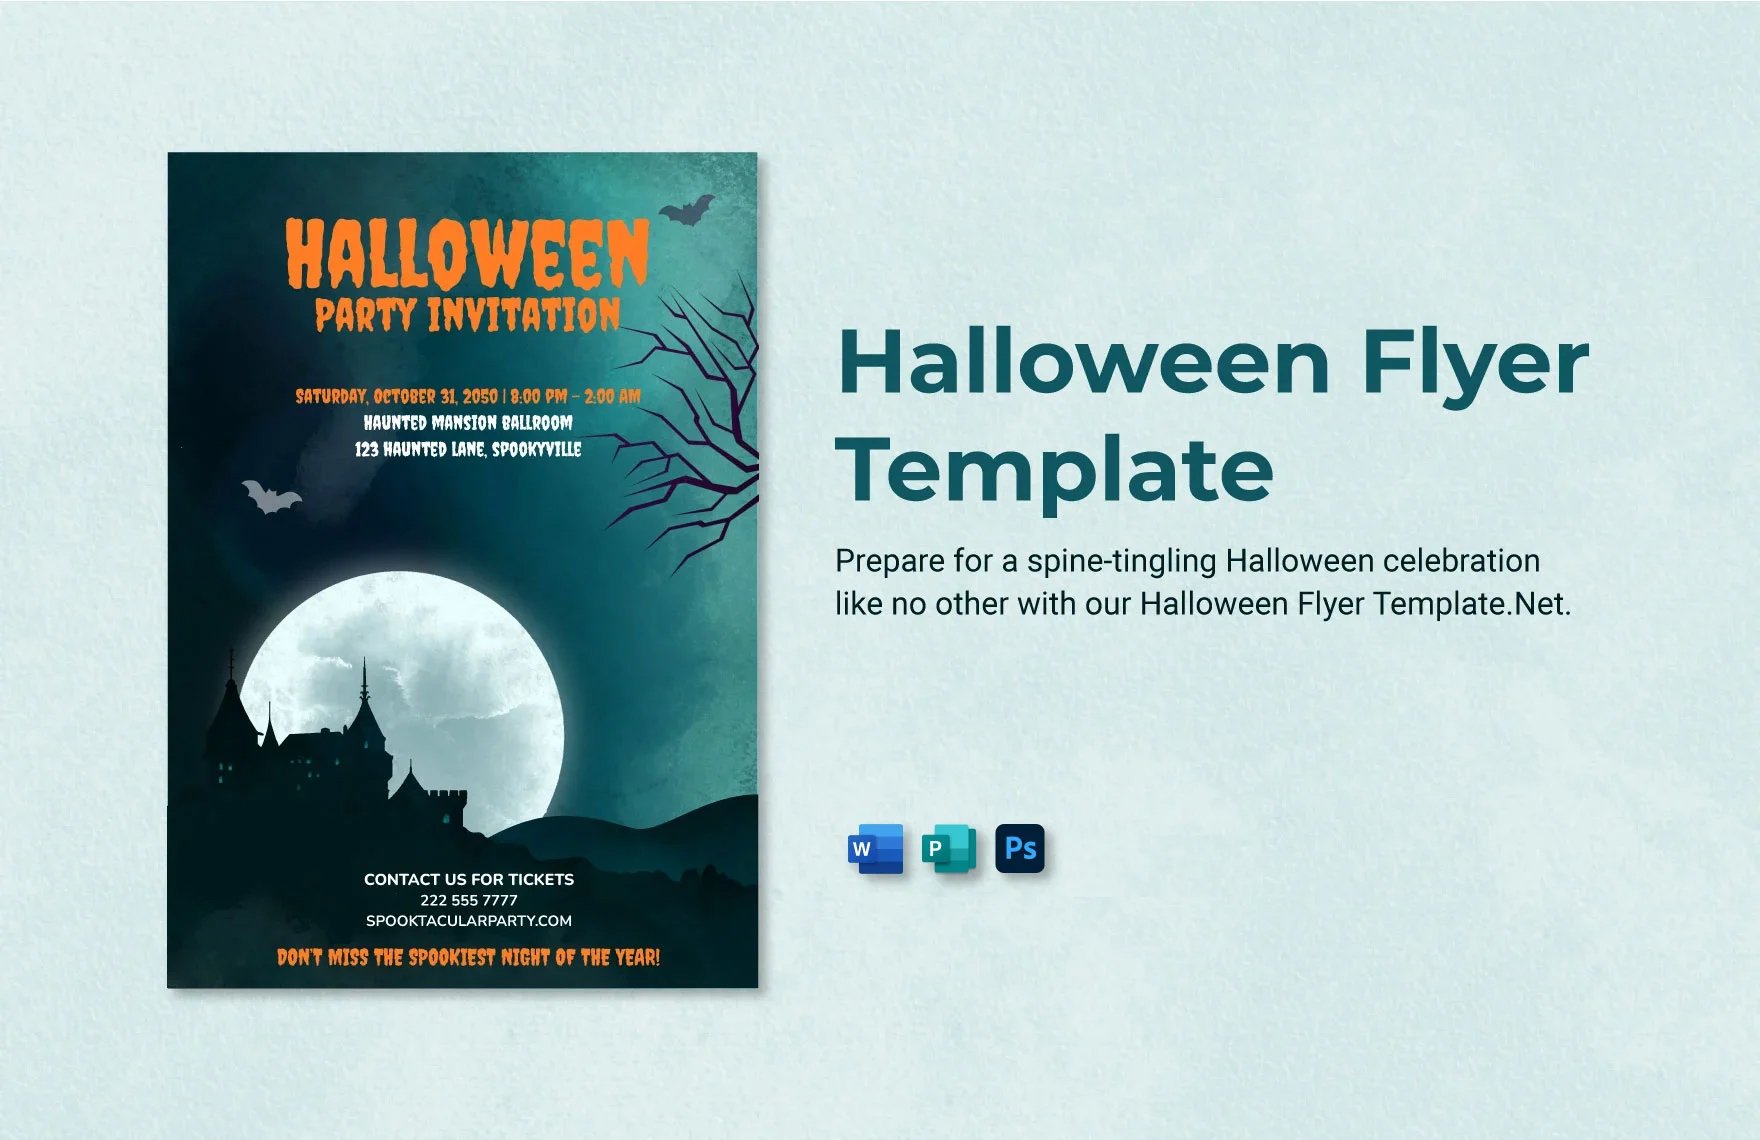 Halloween Flyer Template in Word, PSD, Publisher